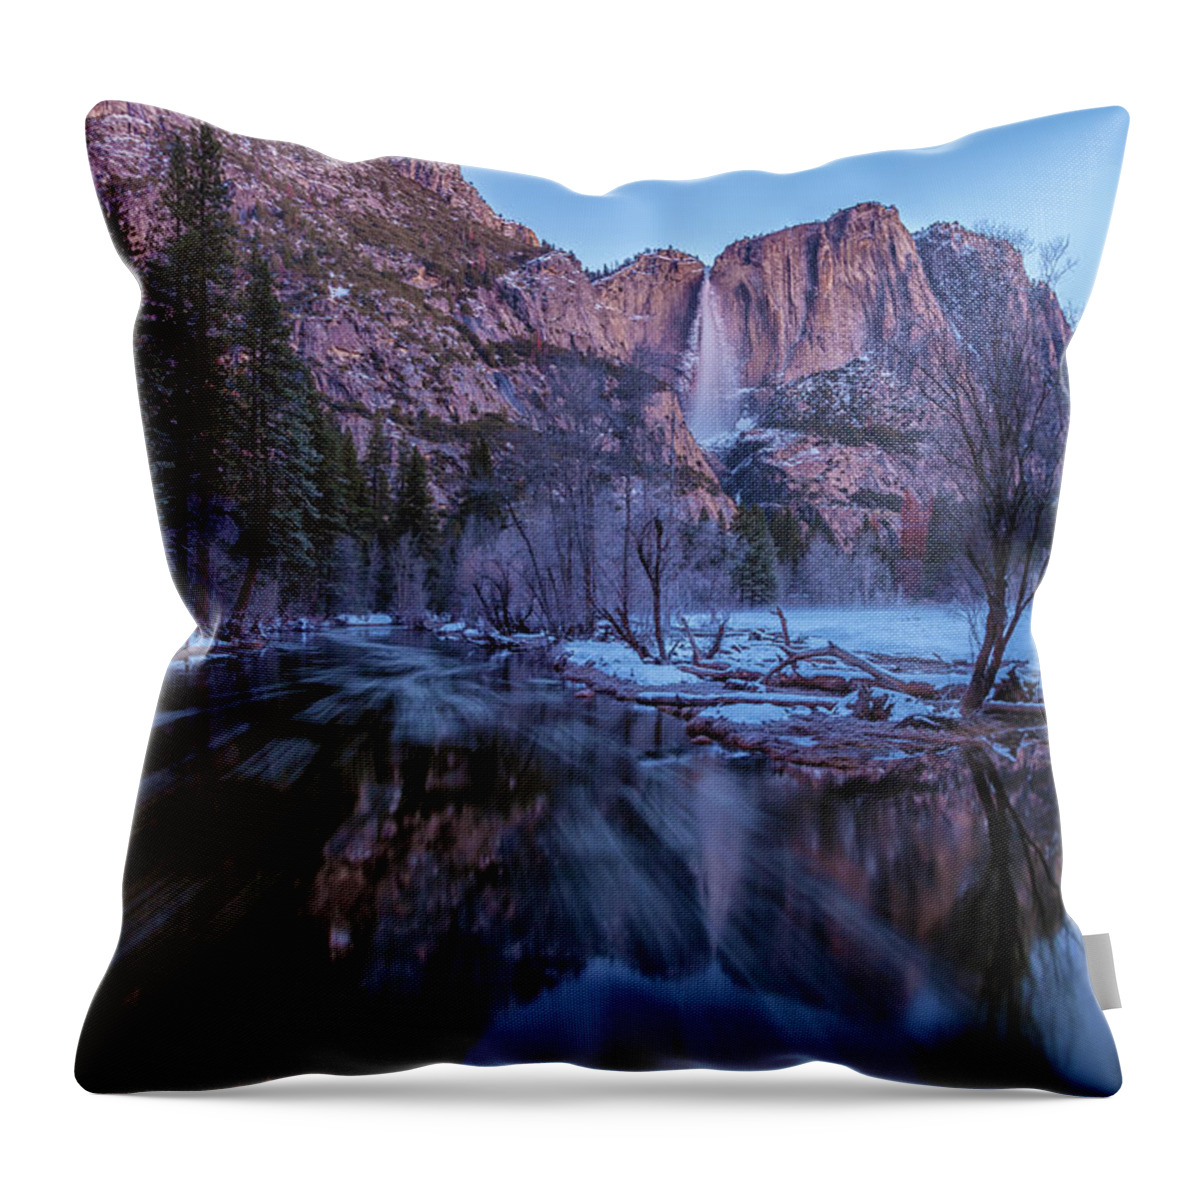 Landscape Throw Pillow featuring the photograph Yosemite Falls At Early Dawn by Jonathan Nguyen